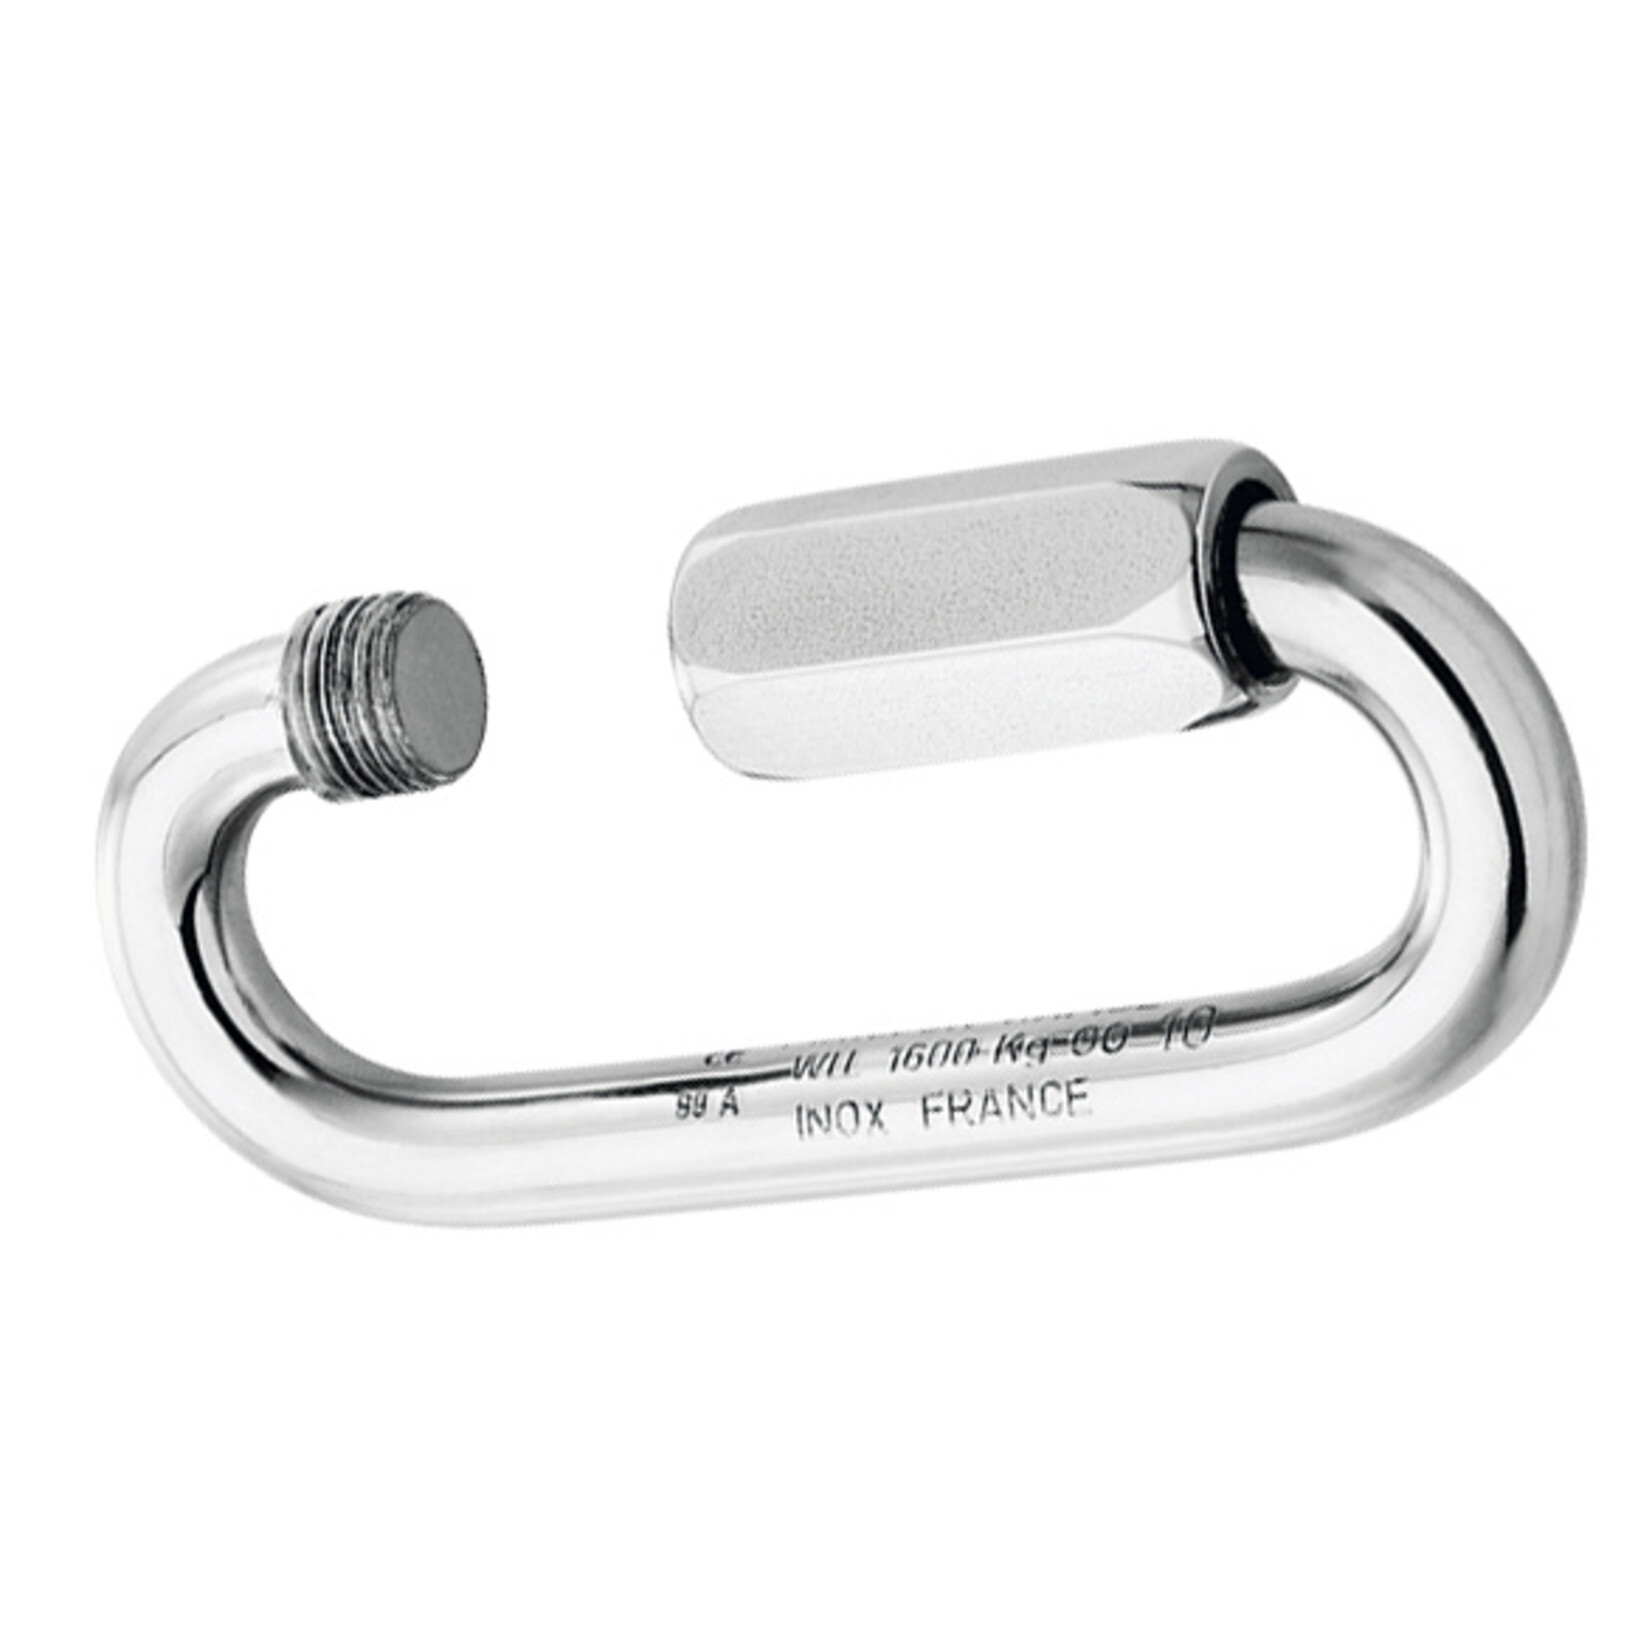 Plastimo Shackle express st.s big opening dia 4mm